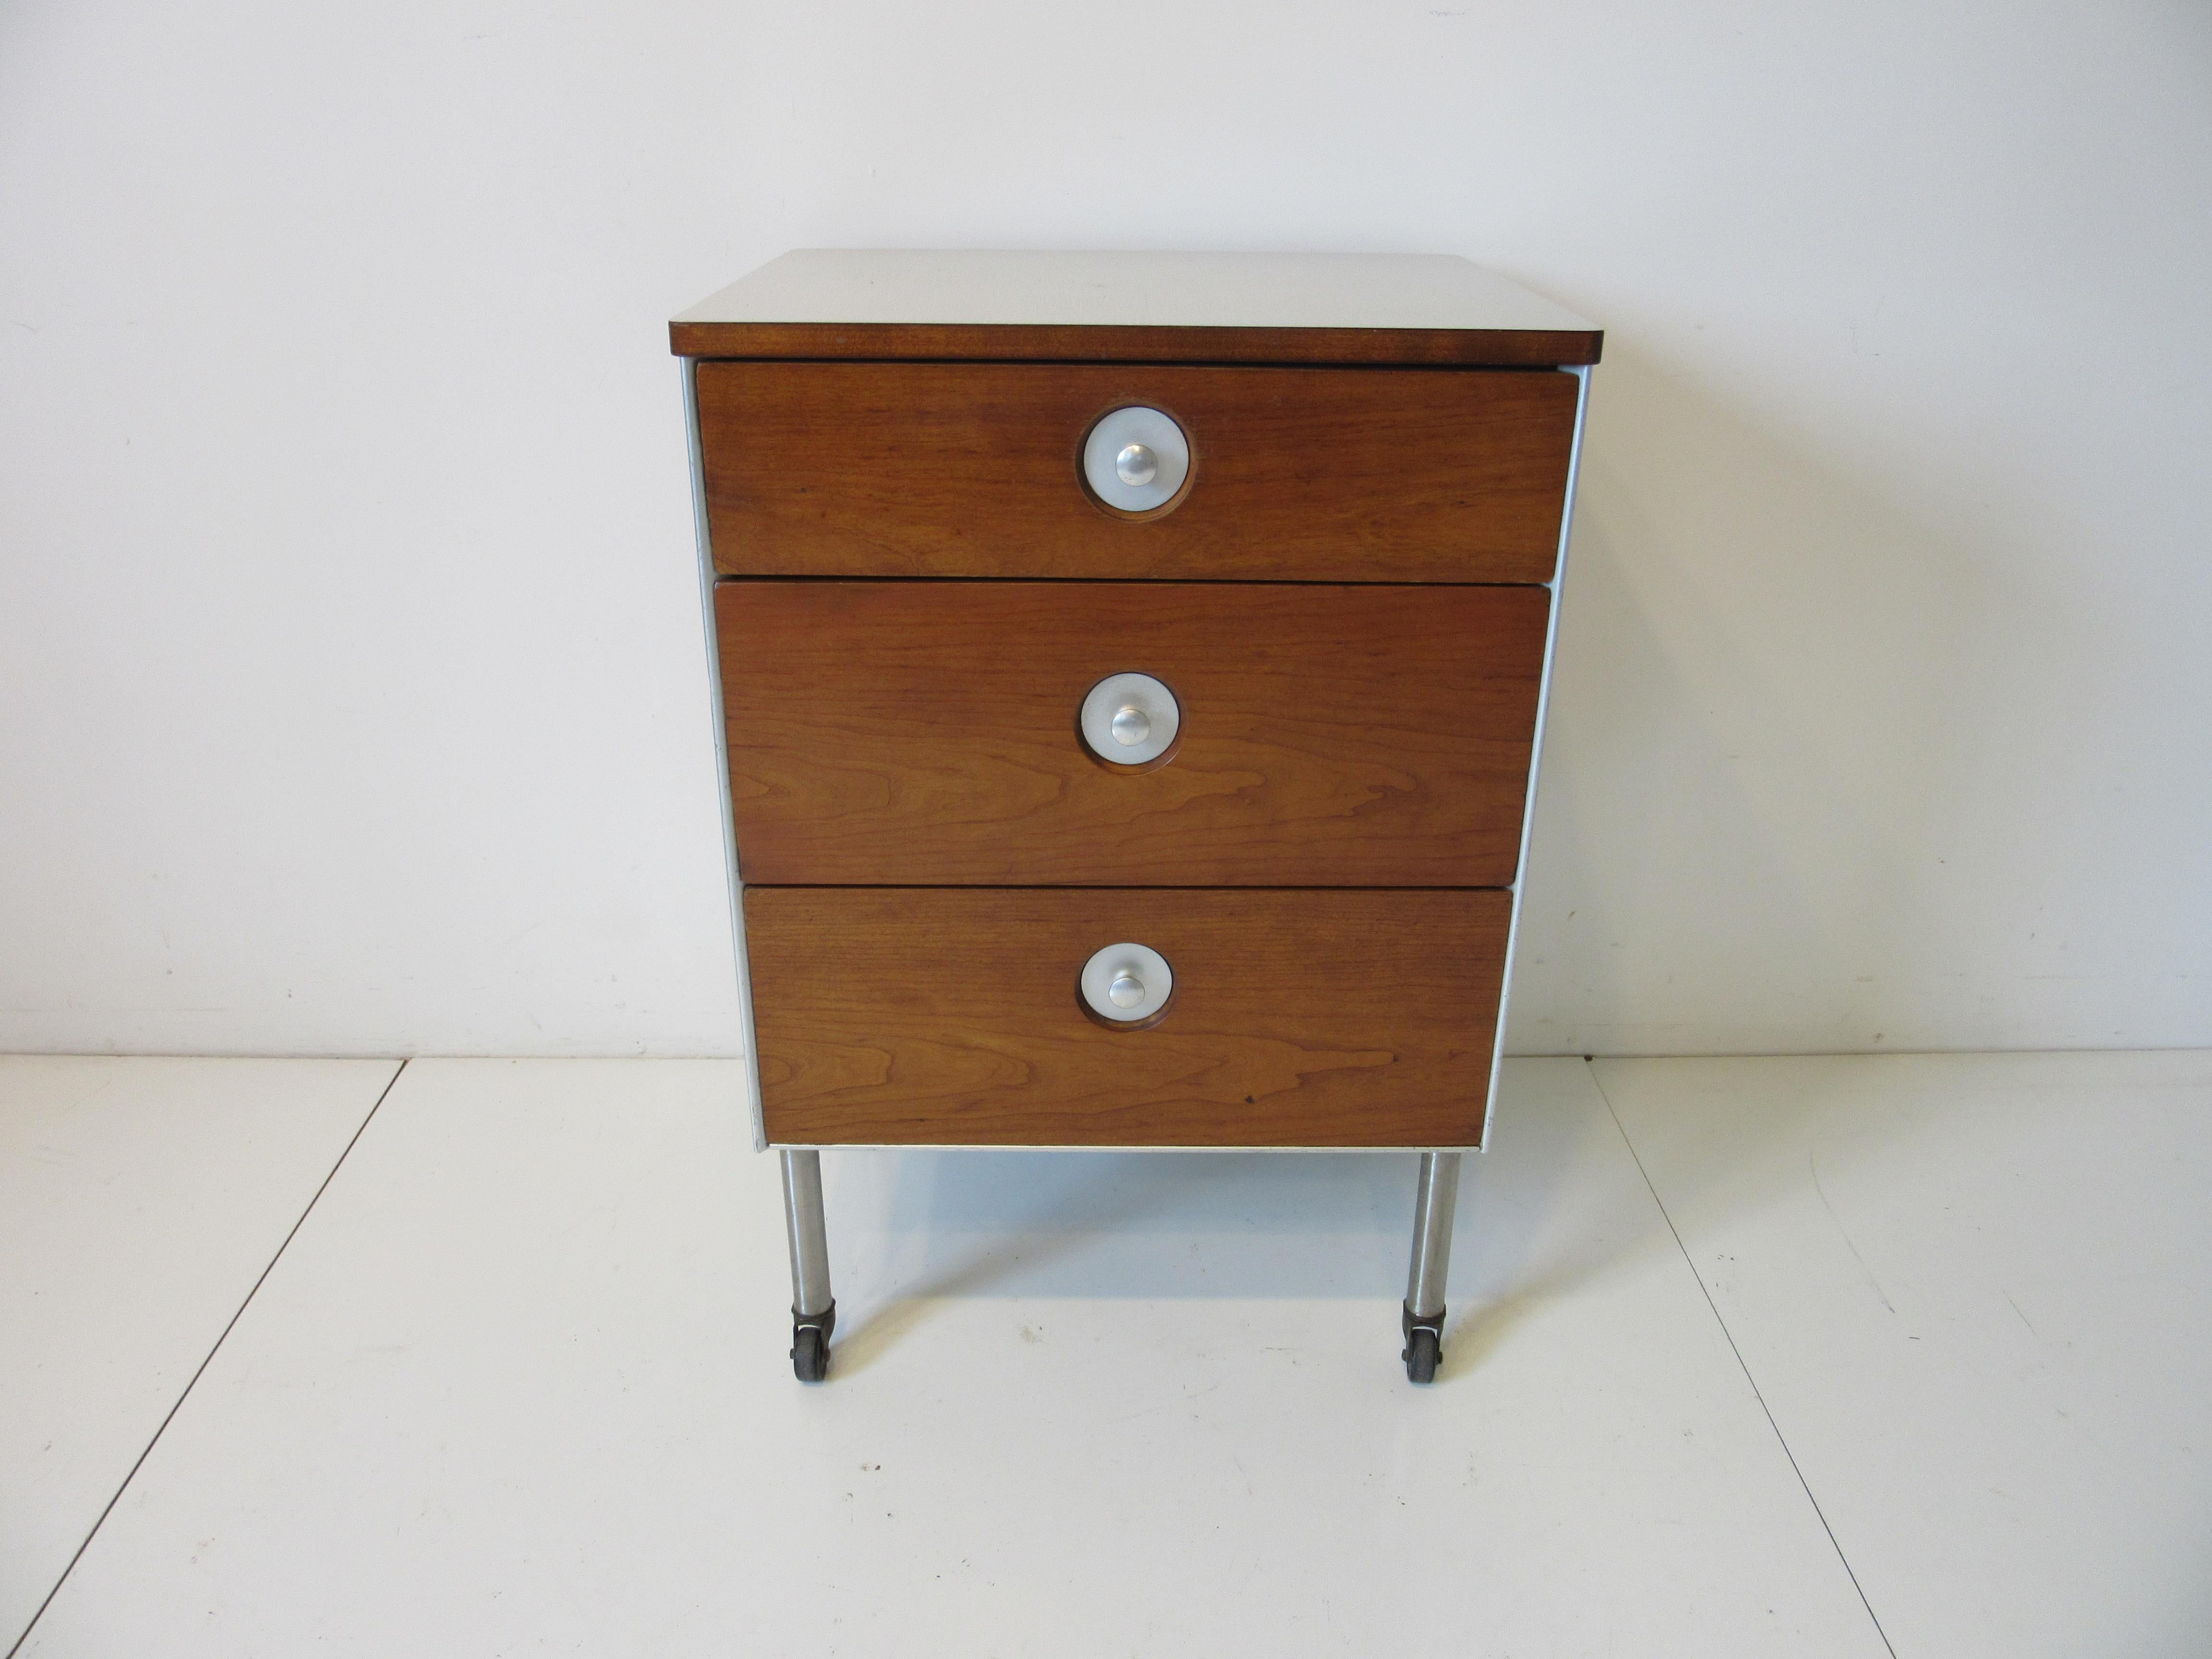 A walnut faced three drawer chest with matching sides, aluminum pulls and construction sitting on stainless steel legs with hard rubber wheels. The top is in a light grayish white toned Formica perfect for use in a bathroom or as a nightstand with a